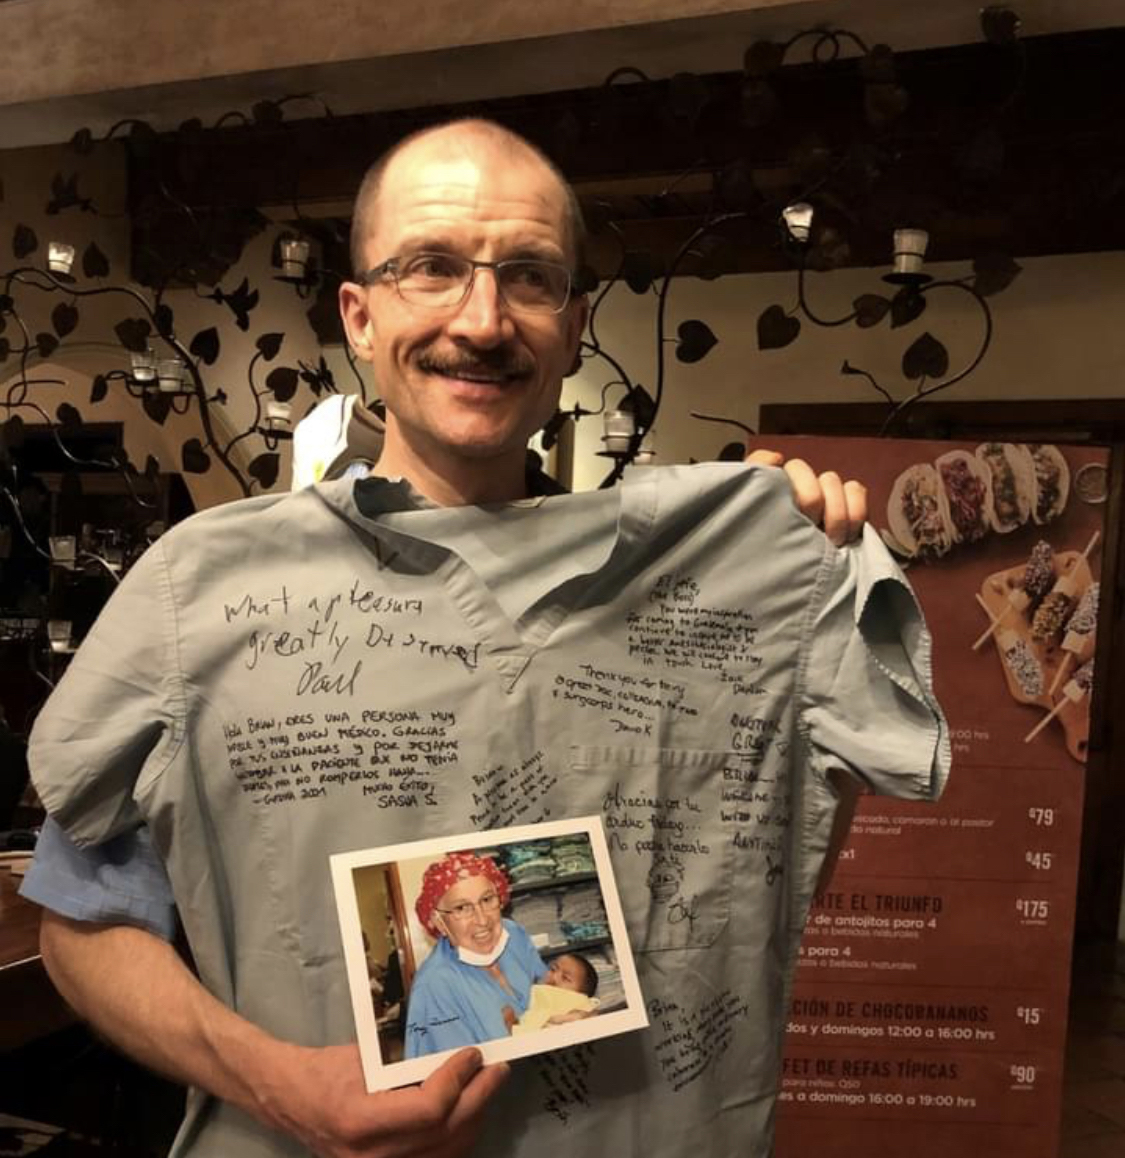 "Doctor Gierl posing with a signed scrub top and a photo of a nurse holding a baby"